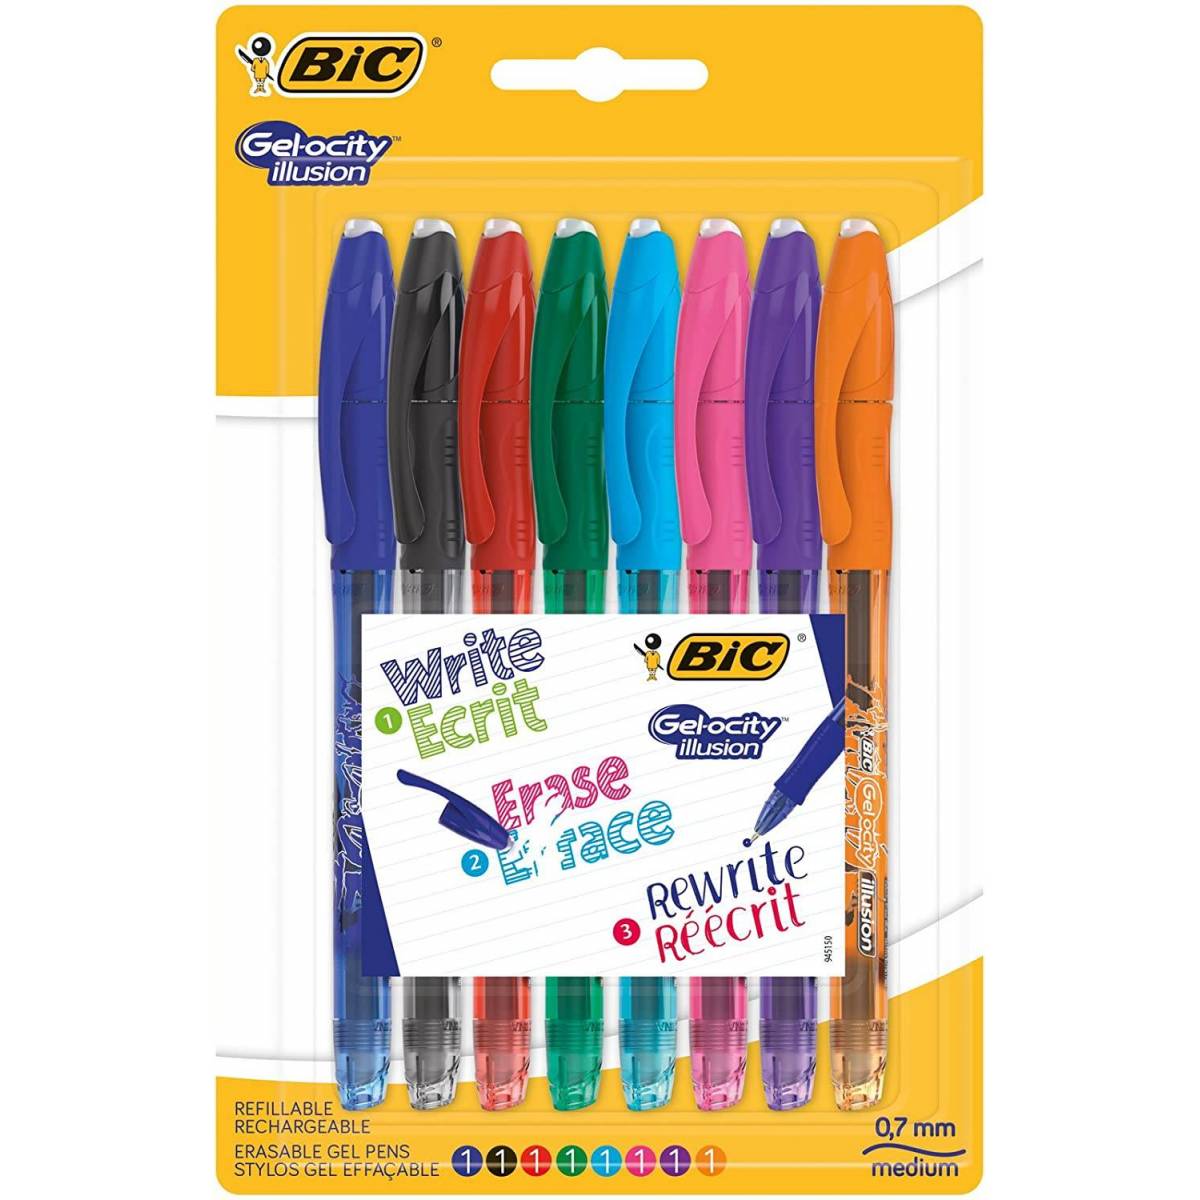 BIC 943460 Gelo-city Illusion Lot de 8 Rollers pointe moyenne